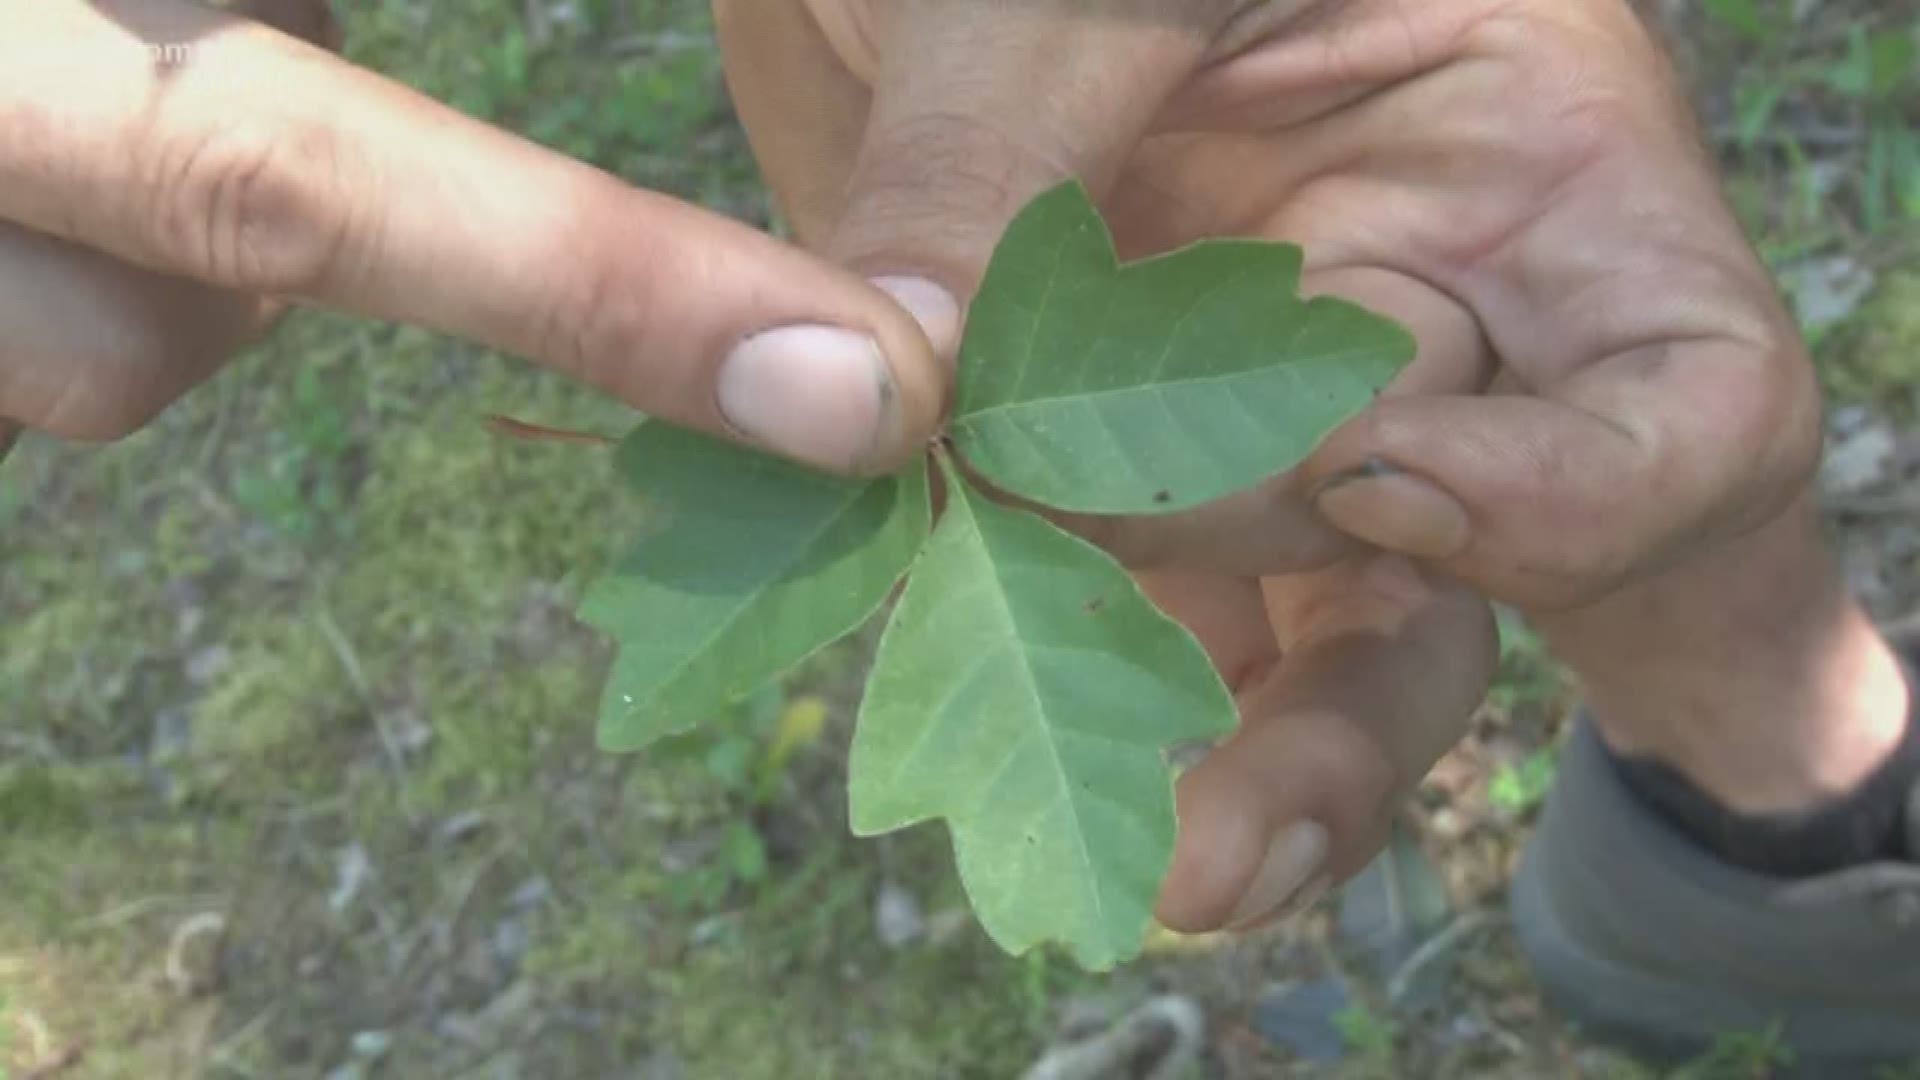 A wet spring this year could cause more poison ivy to grow in places where it normally wouldn't.